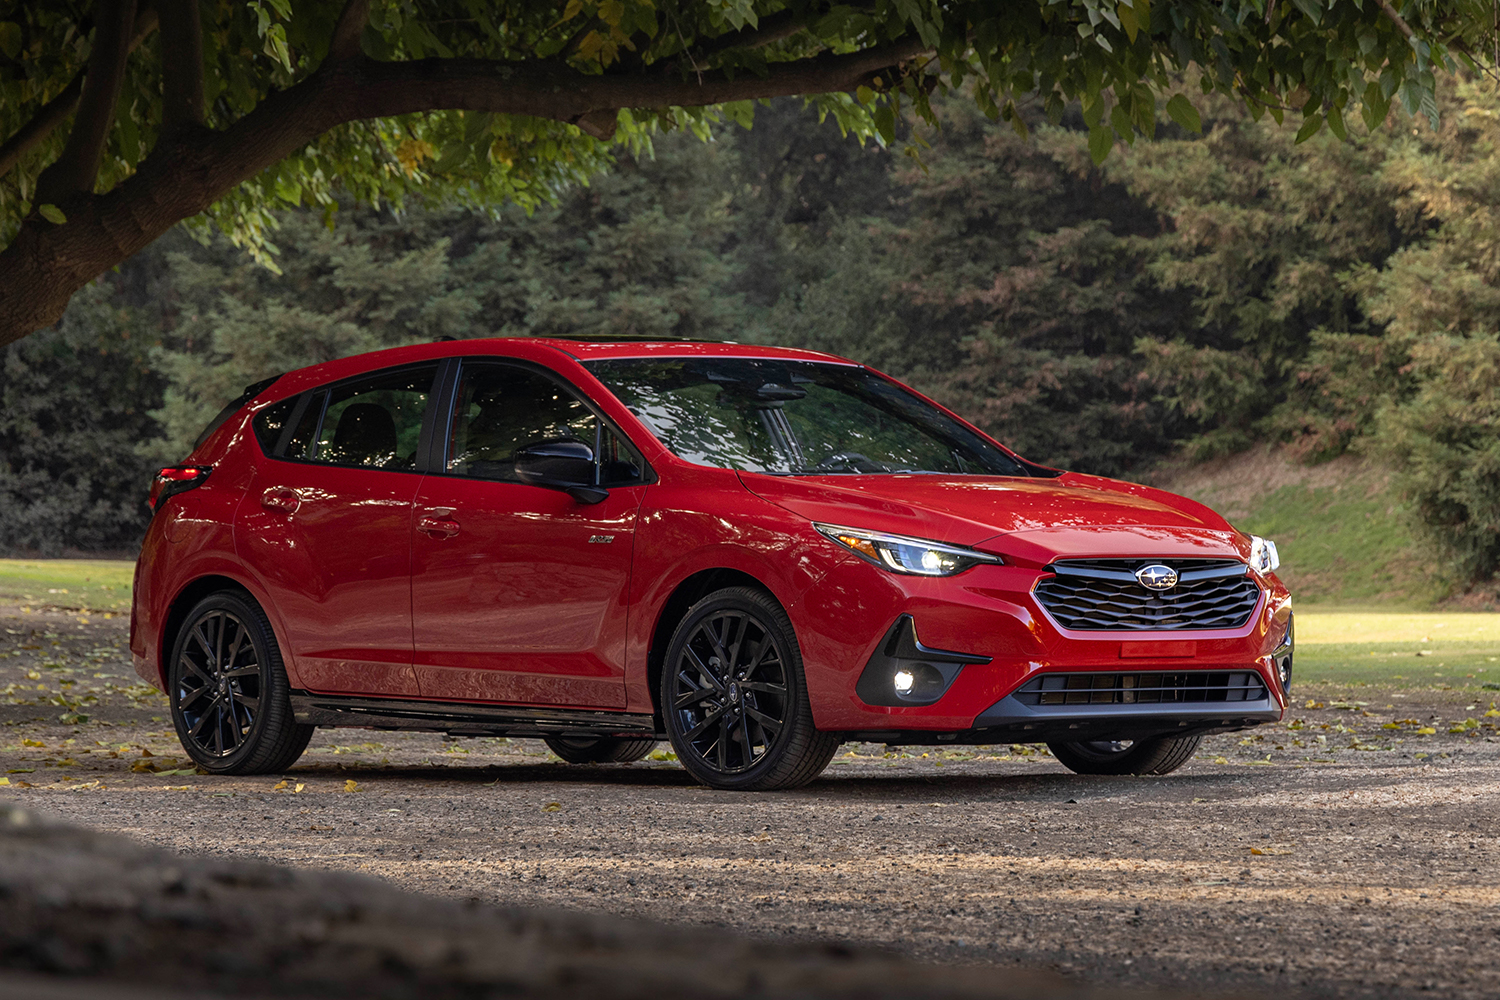 A red 2024 Subaru Impreza RS, which is now only available as a 5-door hatchback instead of a sedan